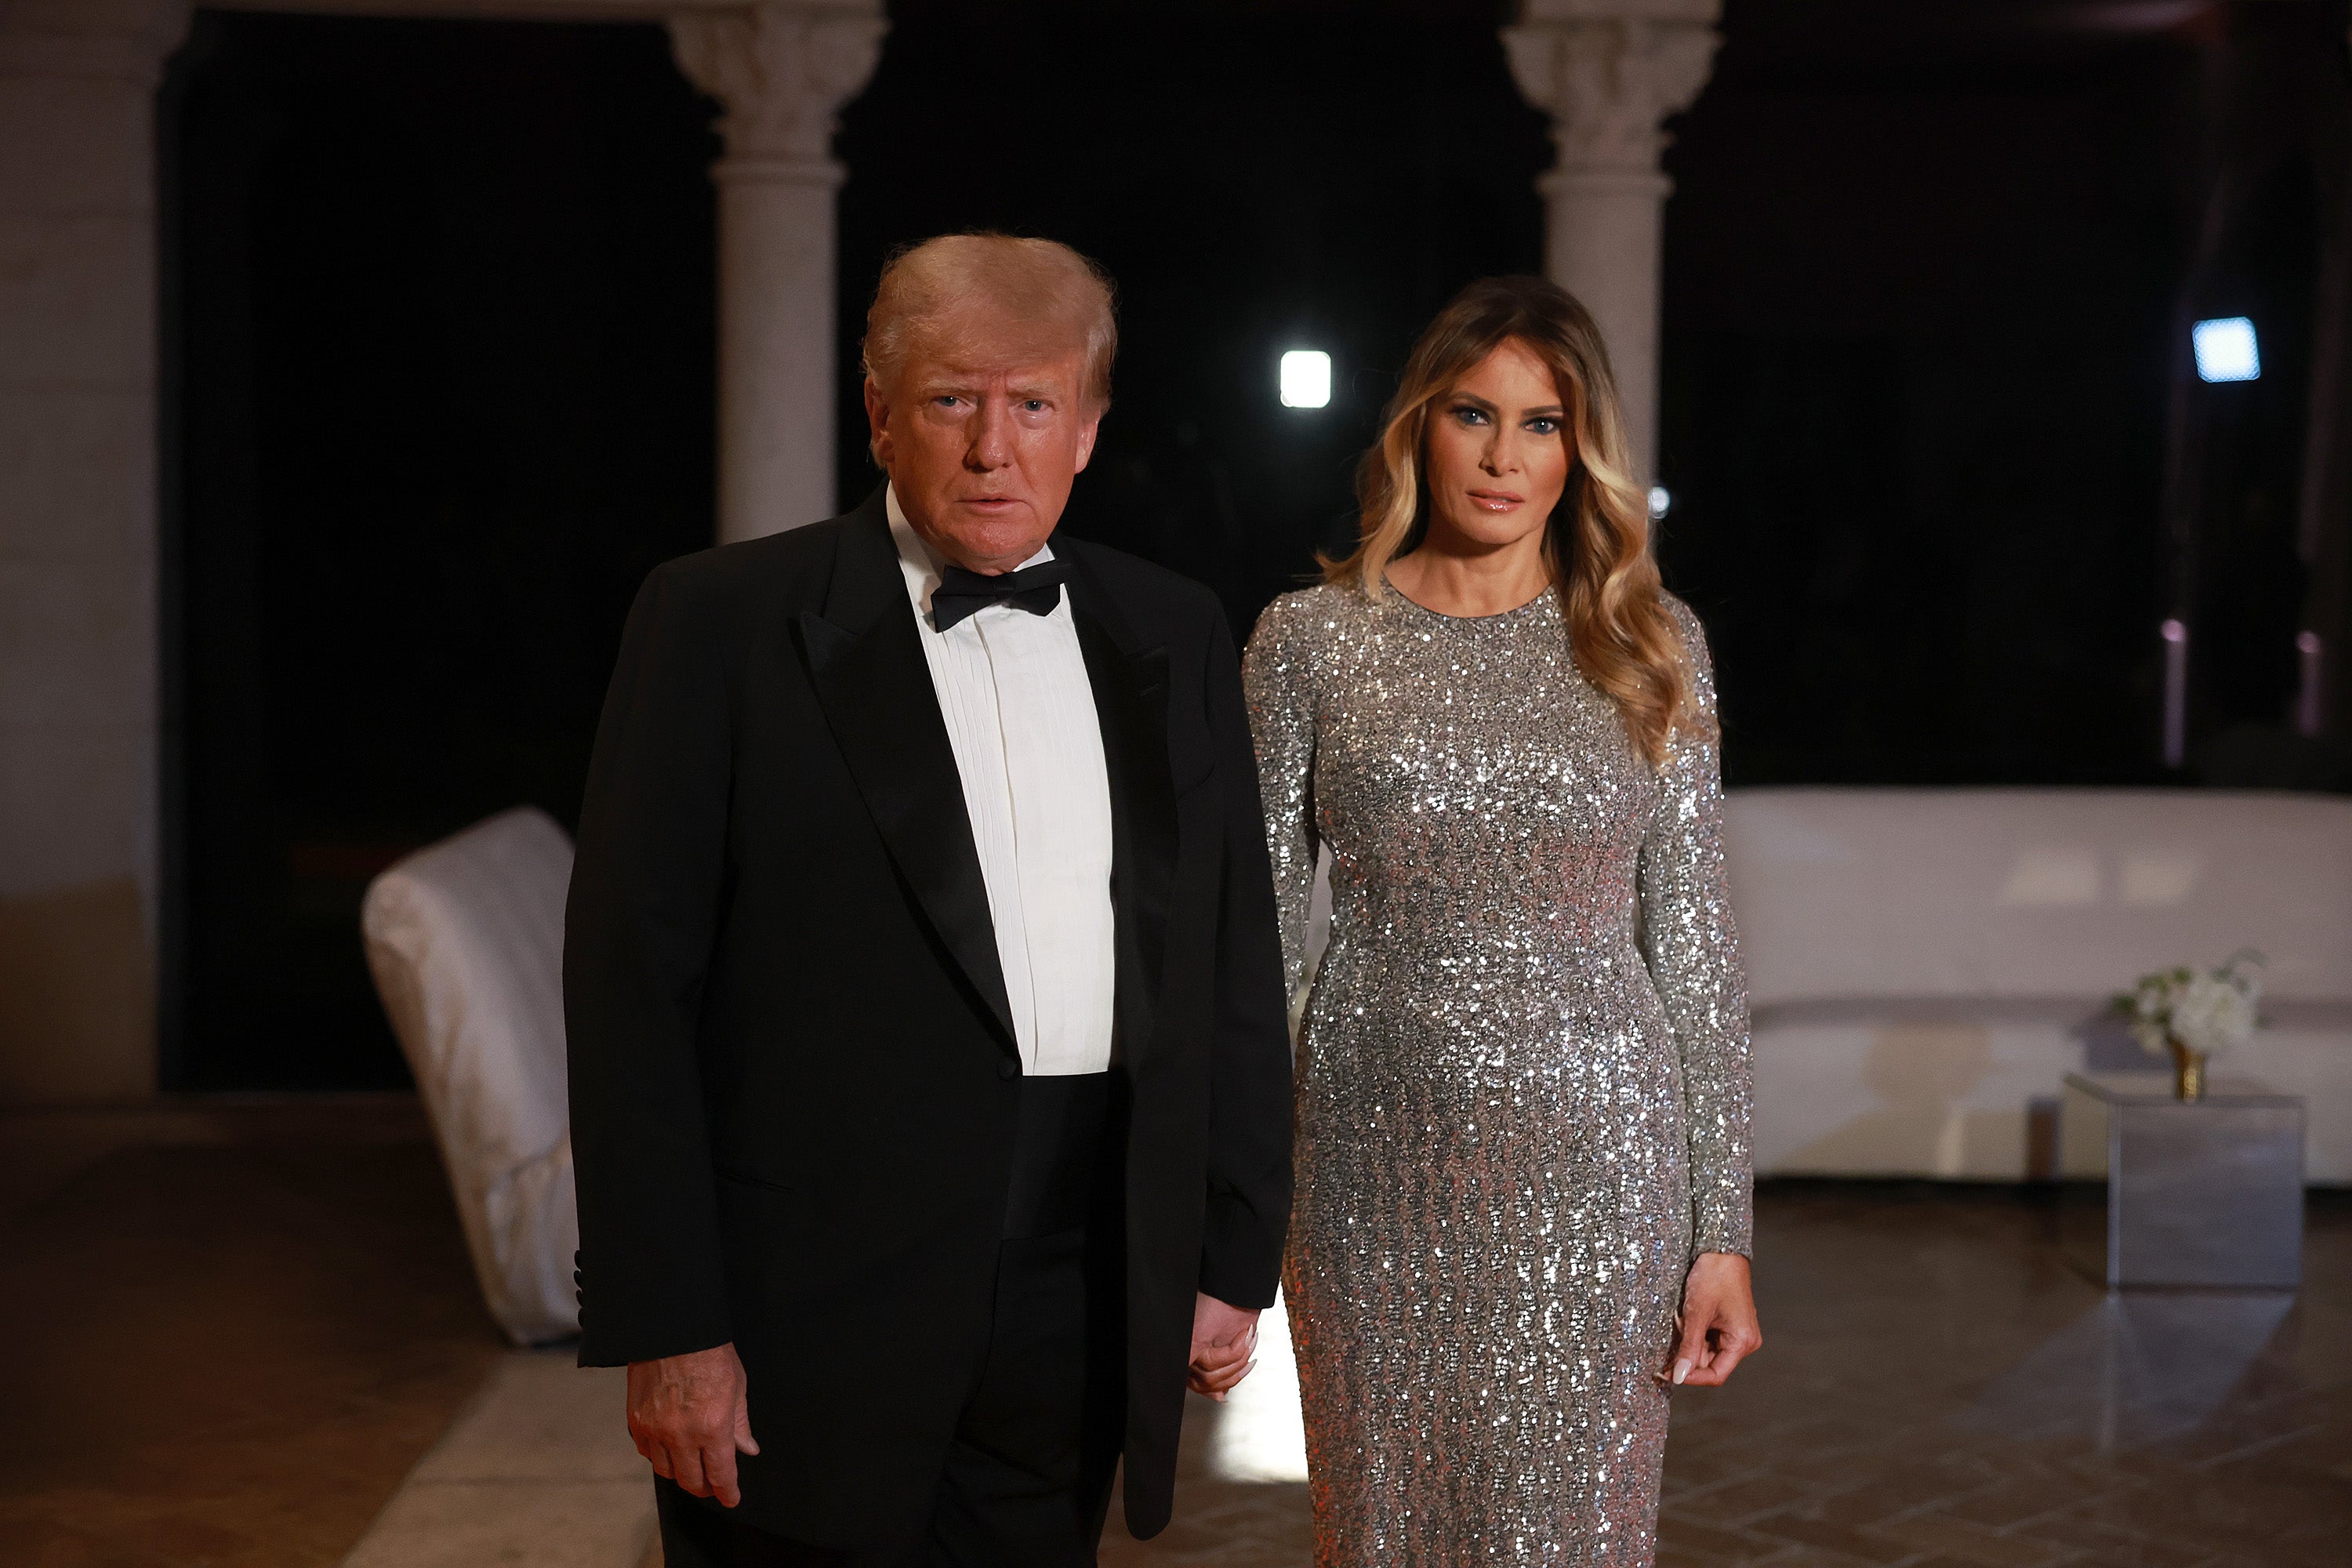 Former US President Donald Trump and former first lady Melania Trump arrive for a New Years event at his Mar-a-Lago home on December 31, 2022 in Palm Beach, Florida.